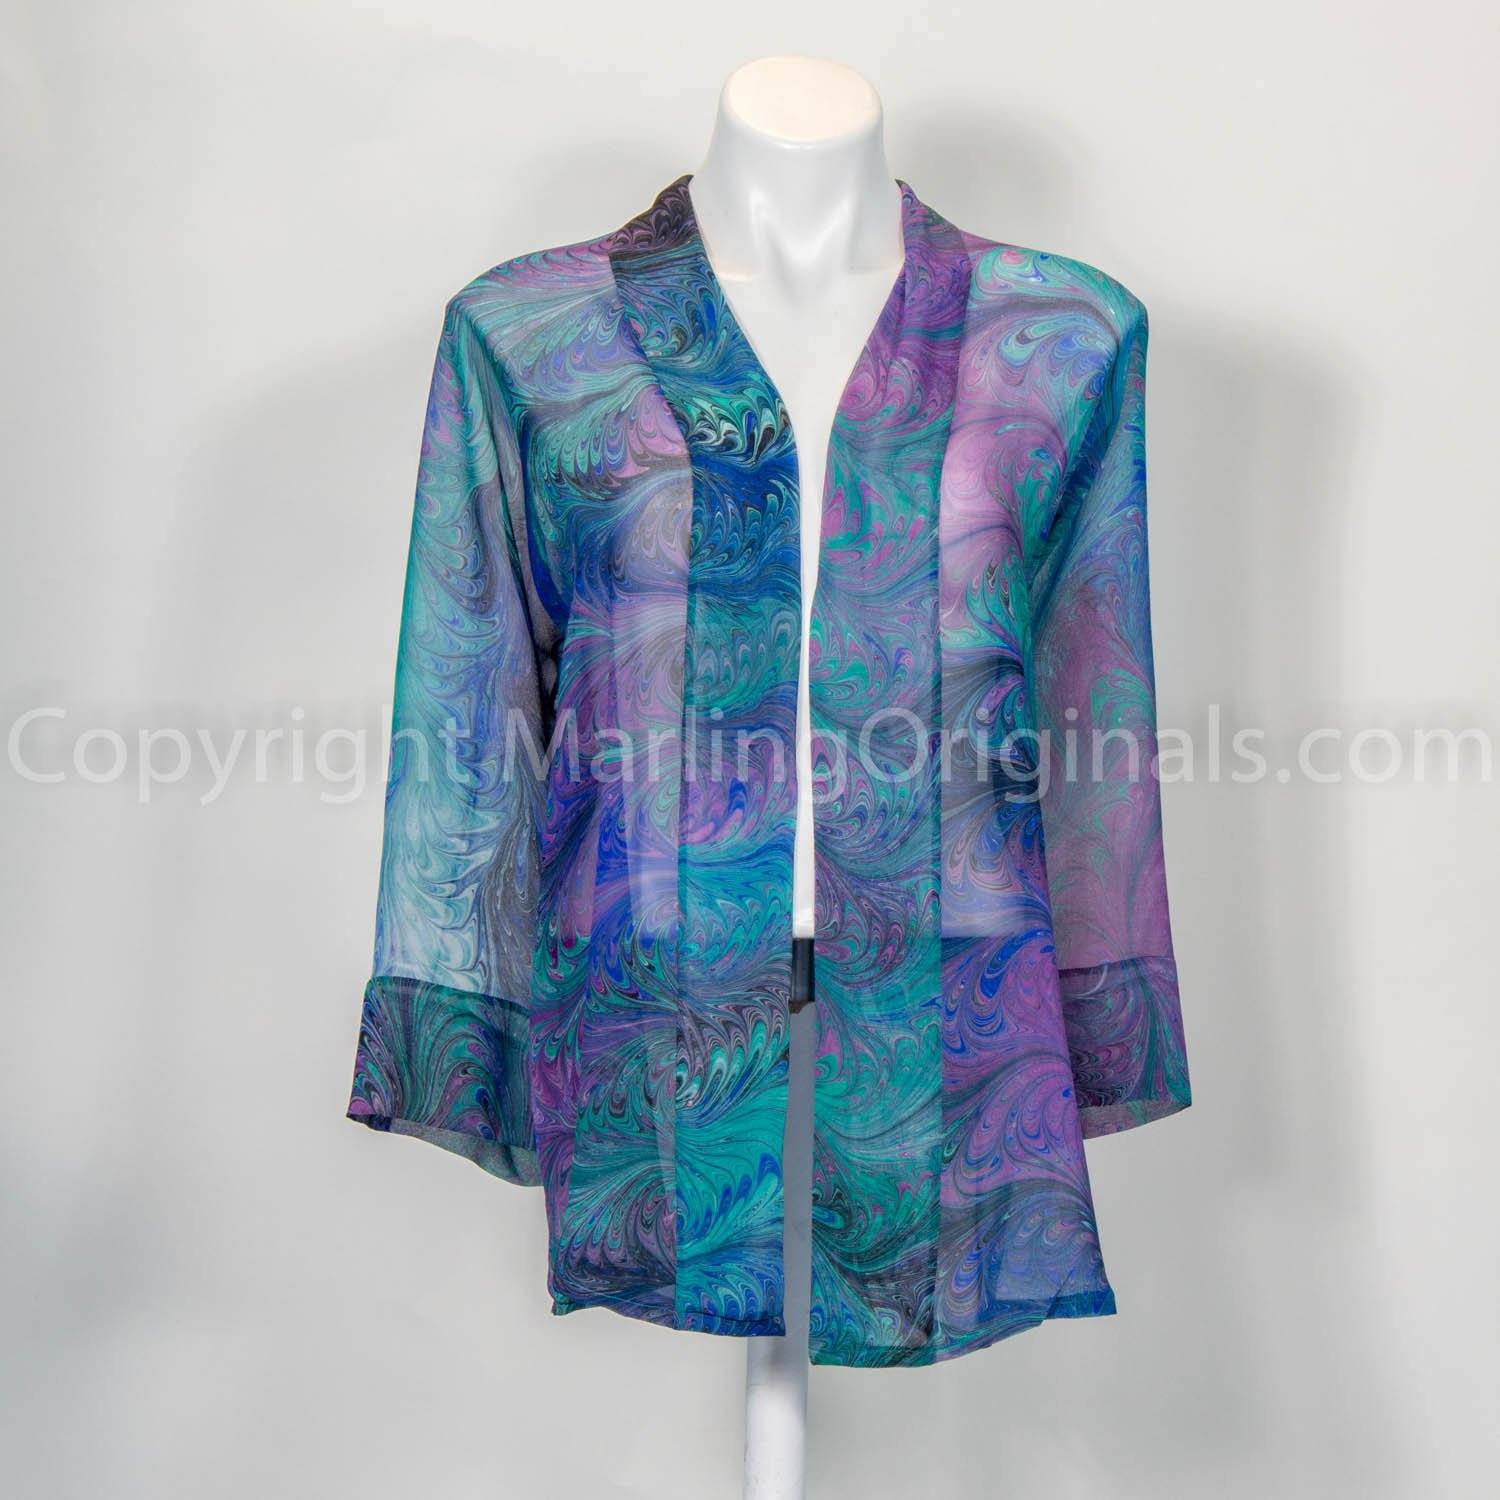 handmarbled sheer silk jacket in blue, violet and green.  Kimono is one size fits most.